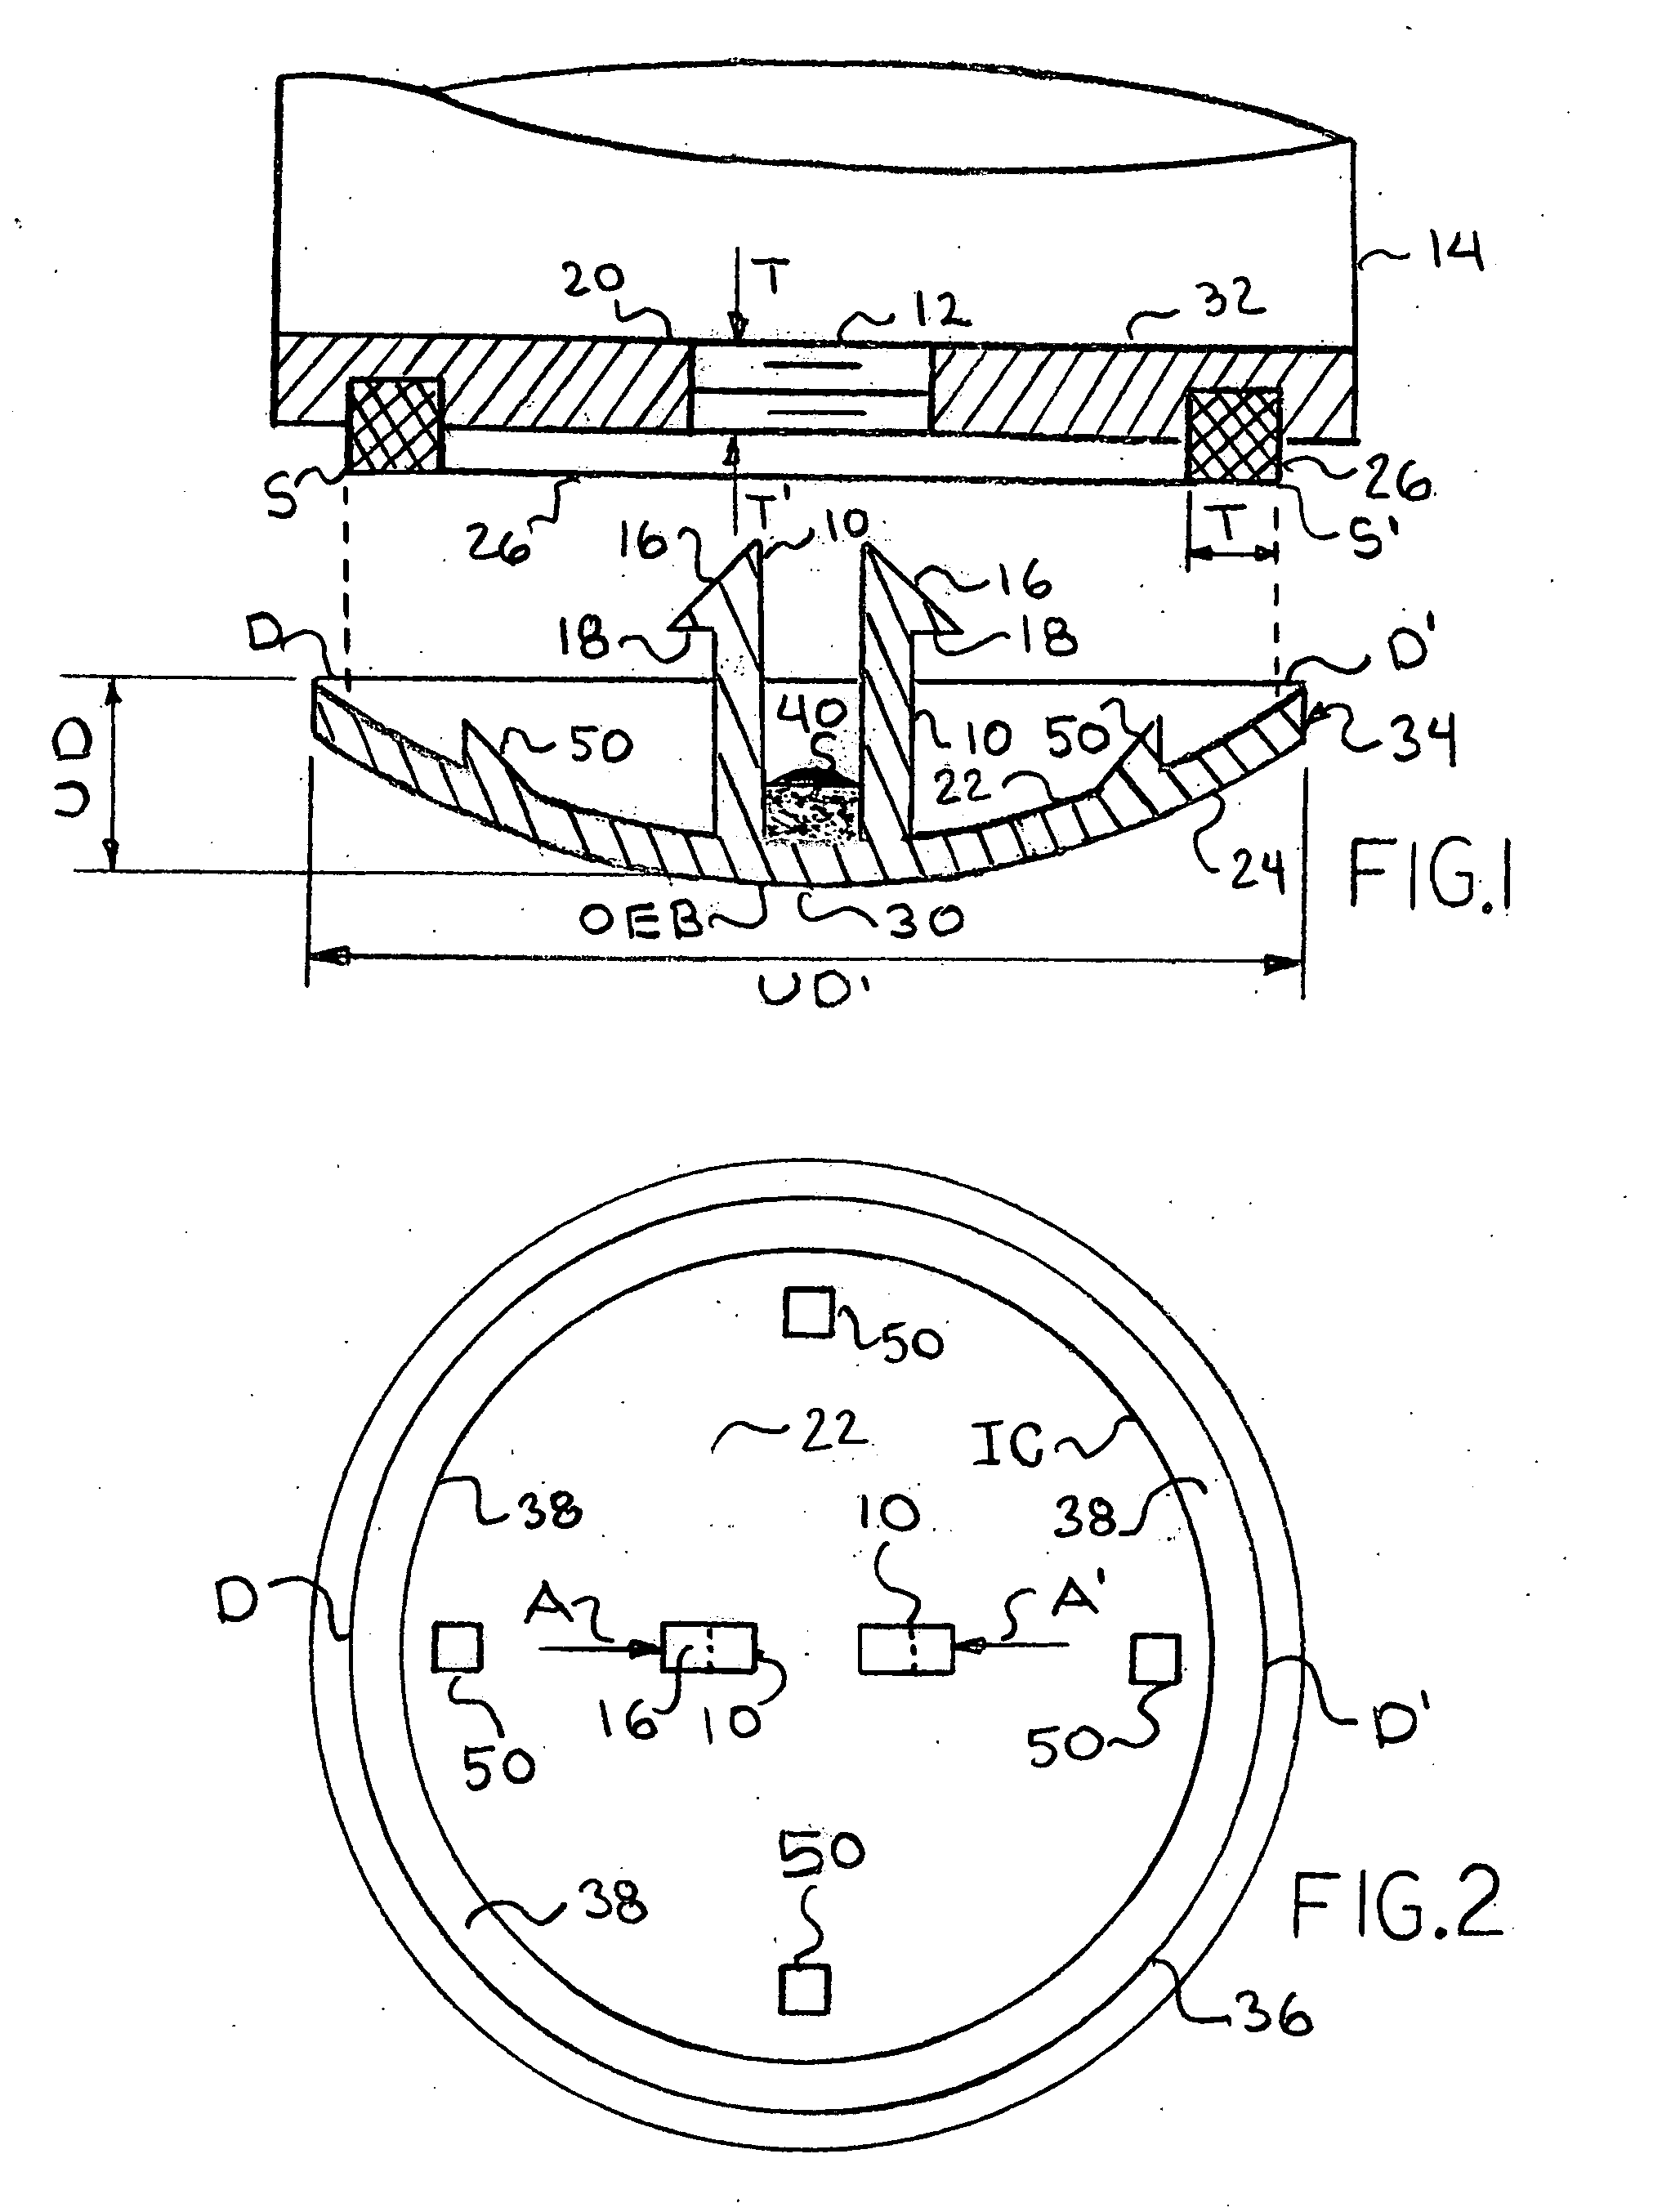 Method and apparatus to promote used oil filter recycling and biological control of their residual oil